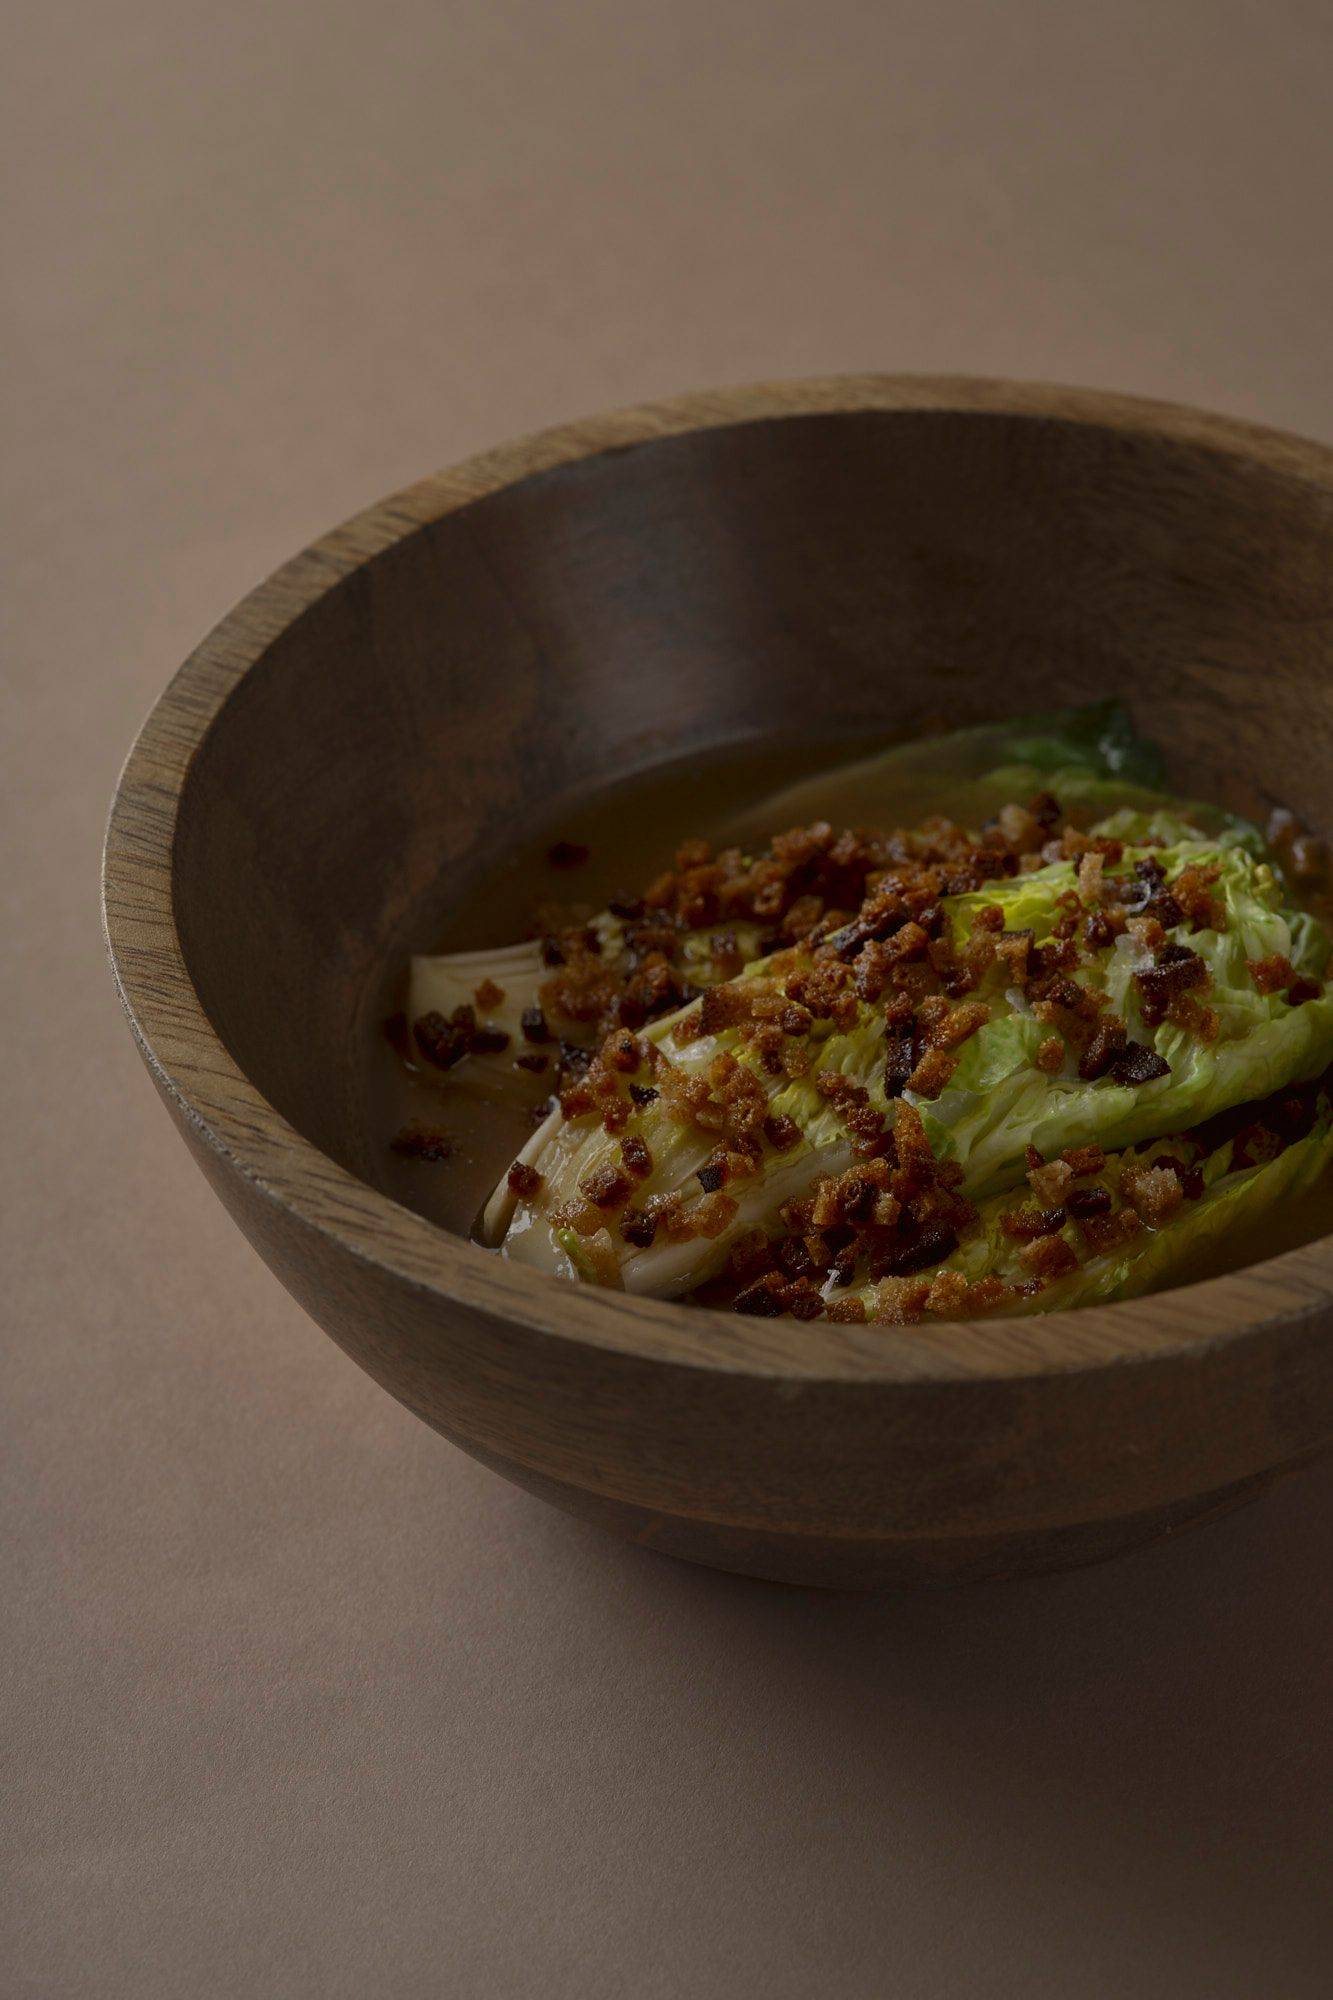 romaine lettuce with miso broth and sourdough in a wooden bowl with brown background